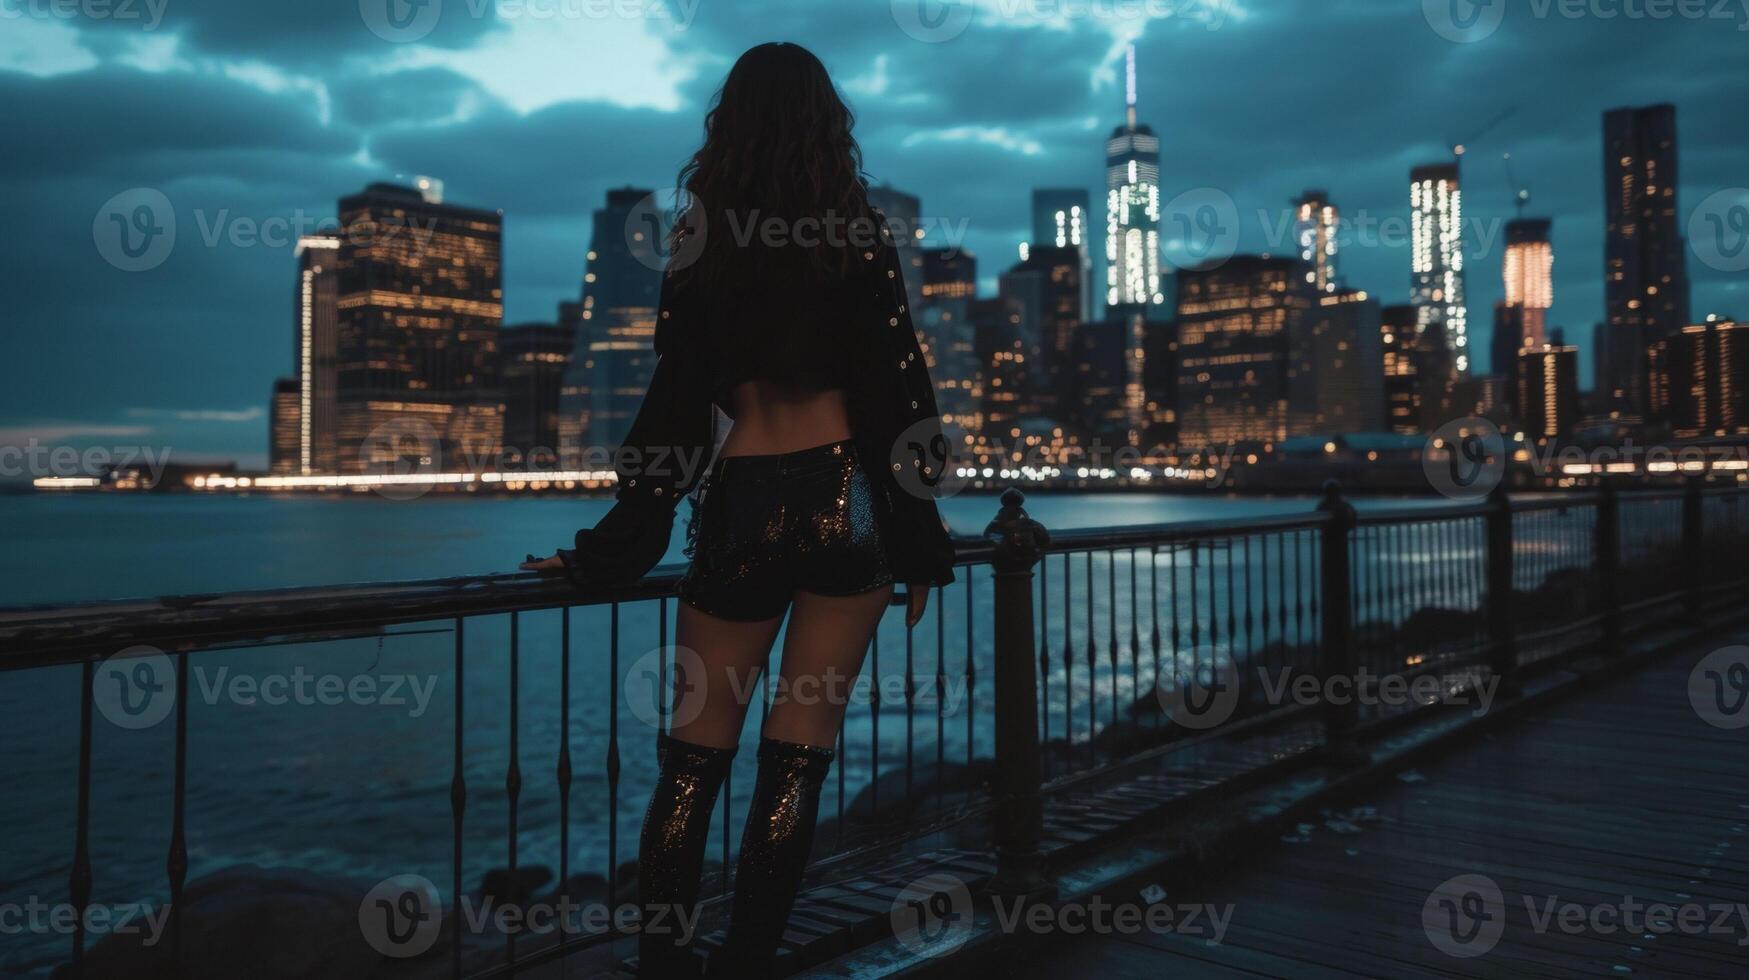 Make a statement with a pair of metallic micro mini shorts paired with a black blouse and thighhigh boots for a gl night out look. The city skyline serves as the perfect backdro photo